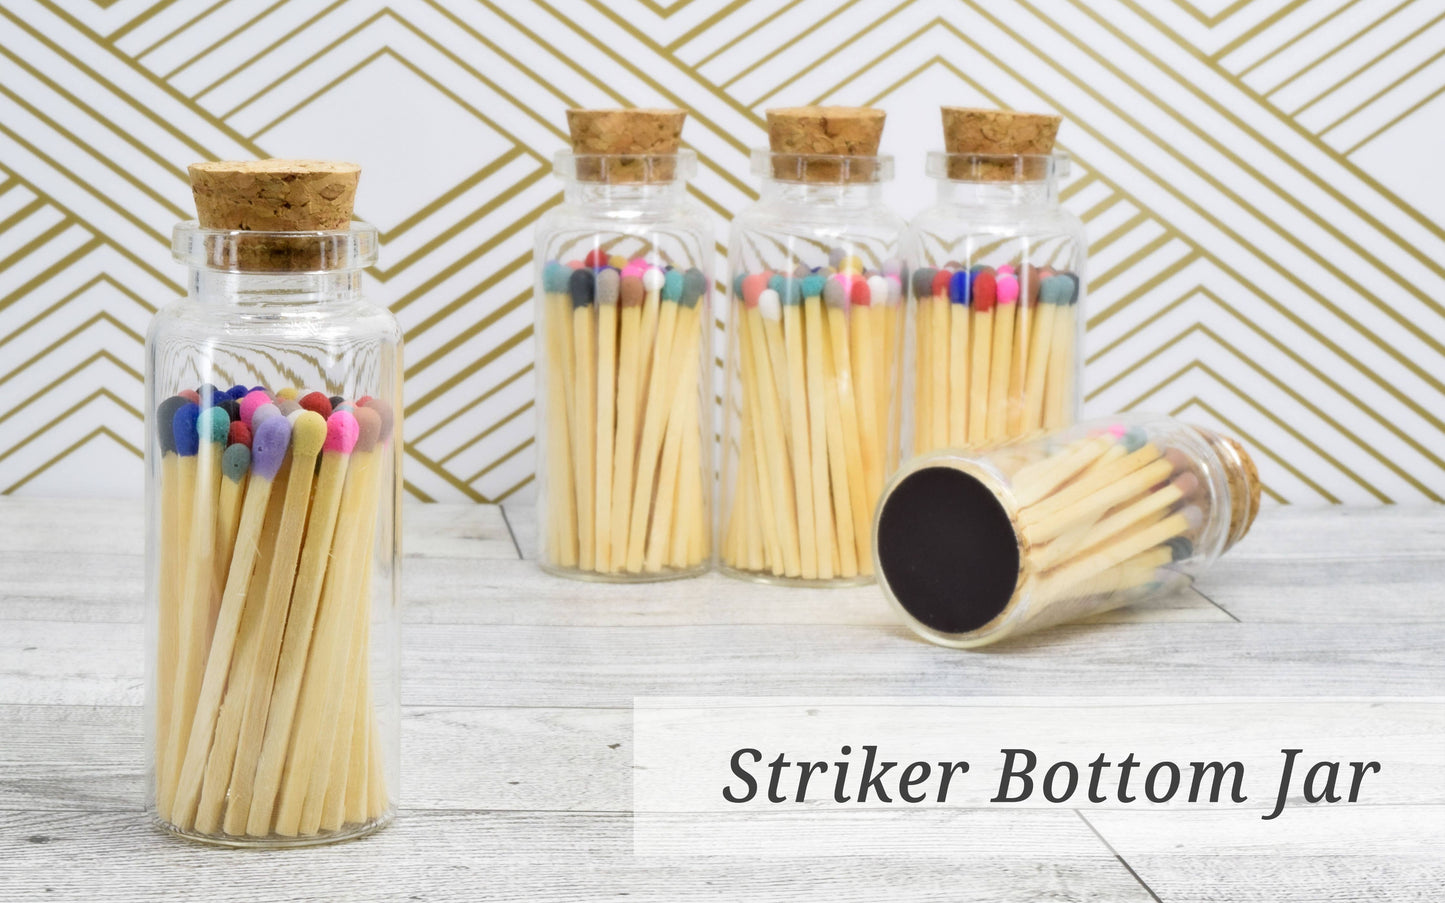 Small Match Bottles - Safety Matches in Jars with Striker: Mixed Colors / 20 Matchsticks Jar